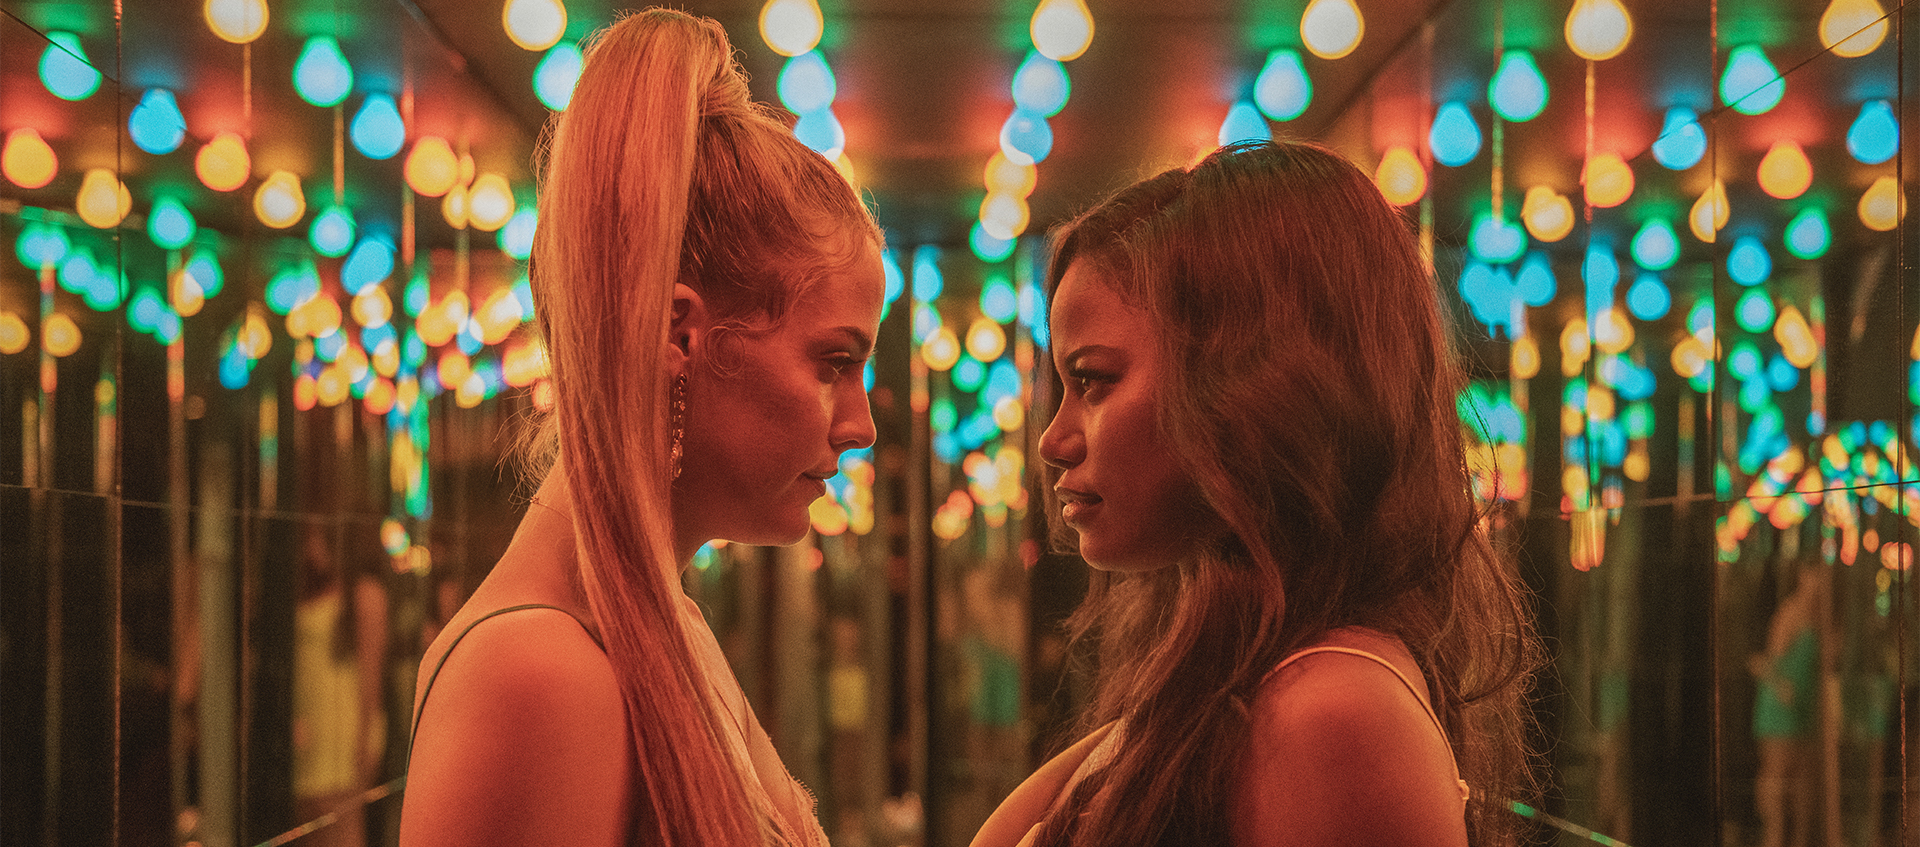 Two women stand in front of a mirrored surface and beneath rows of multicolored lights. The woman on the left has long blond hair in a ponytail and the woman on the right wears a pink top. They are both staring each other down.